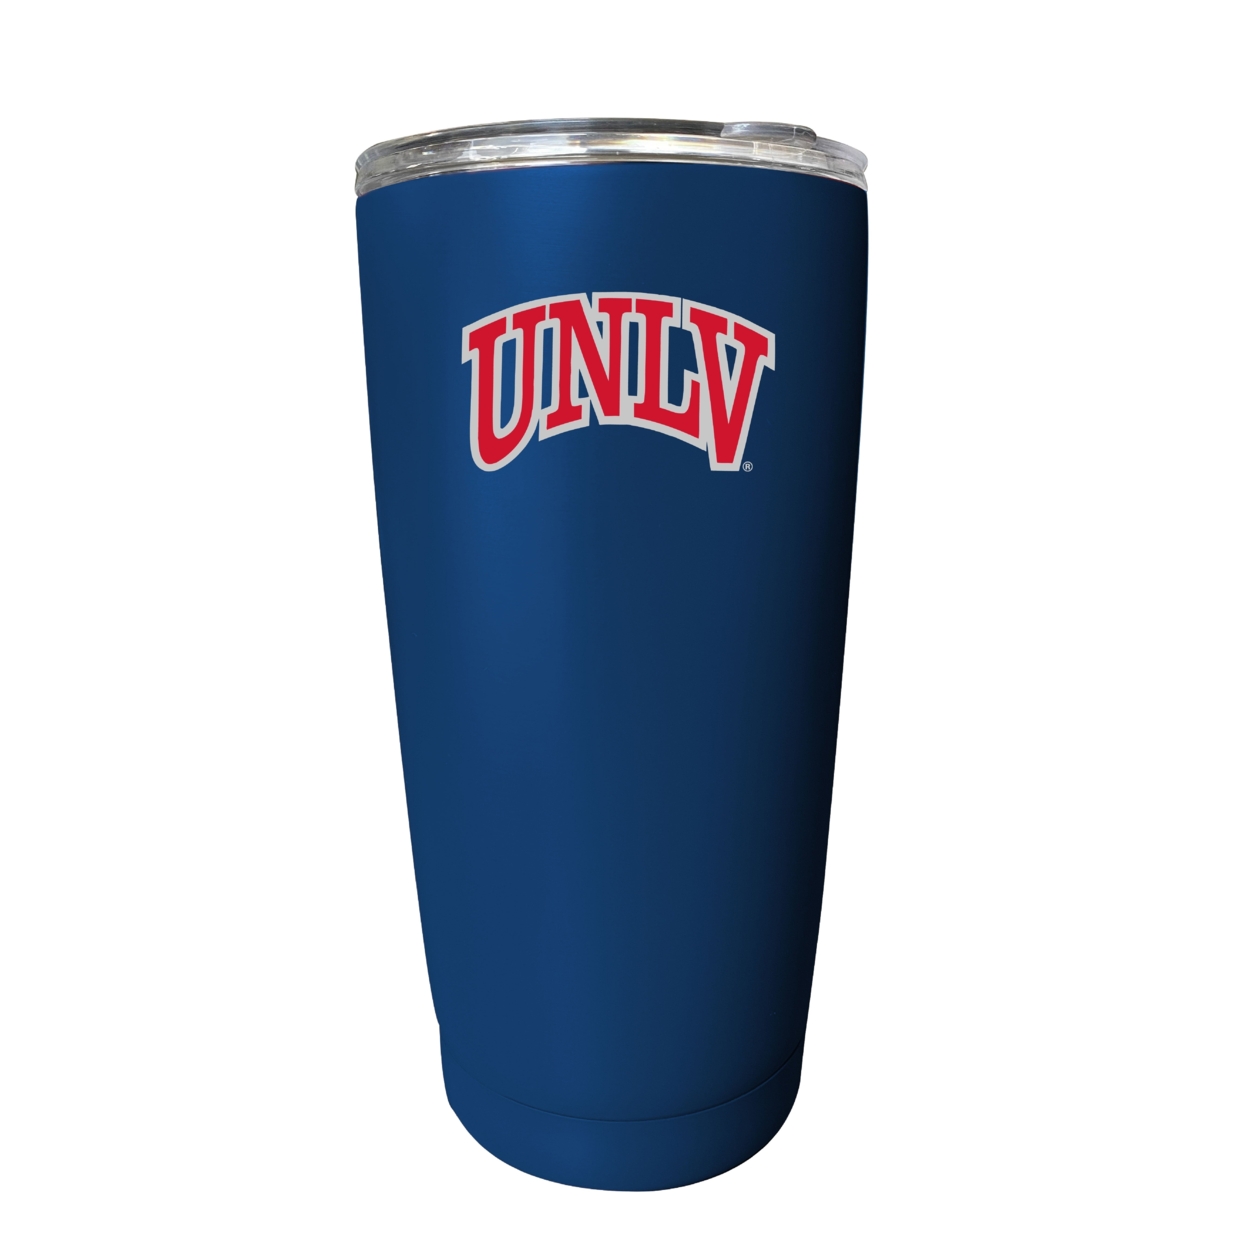 UNLV Rebels 16 Oz Insulated Stainless Steel Tumbler - Choose Your Color. - Navy